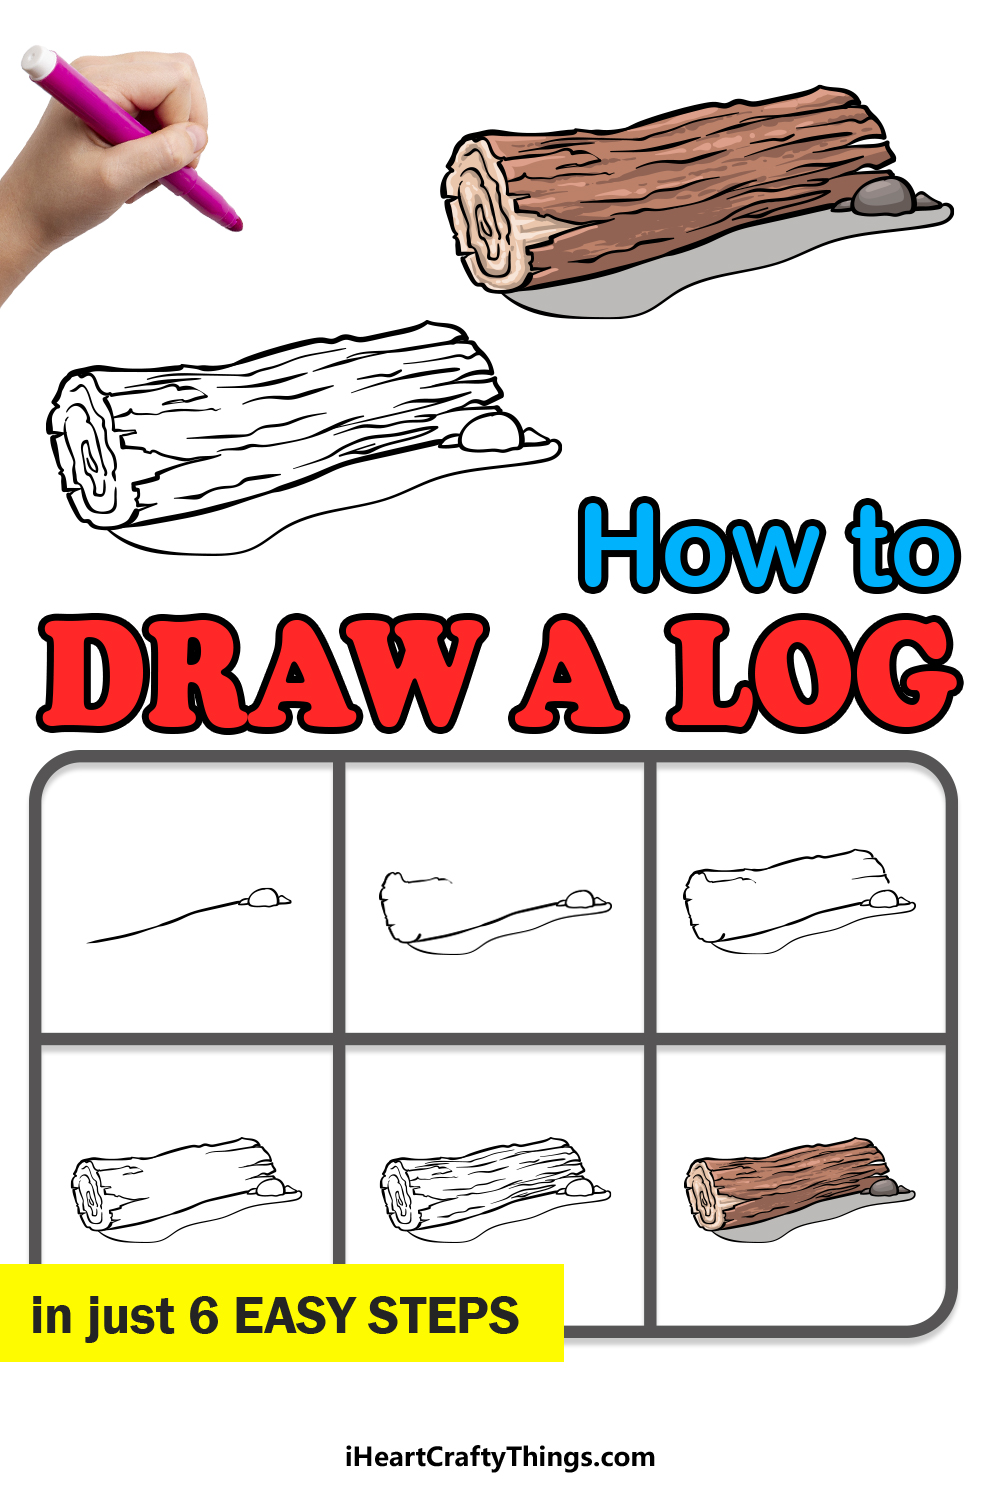 how to draw a log in 6 easy steps